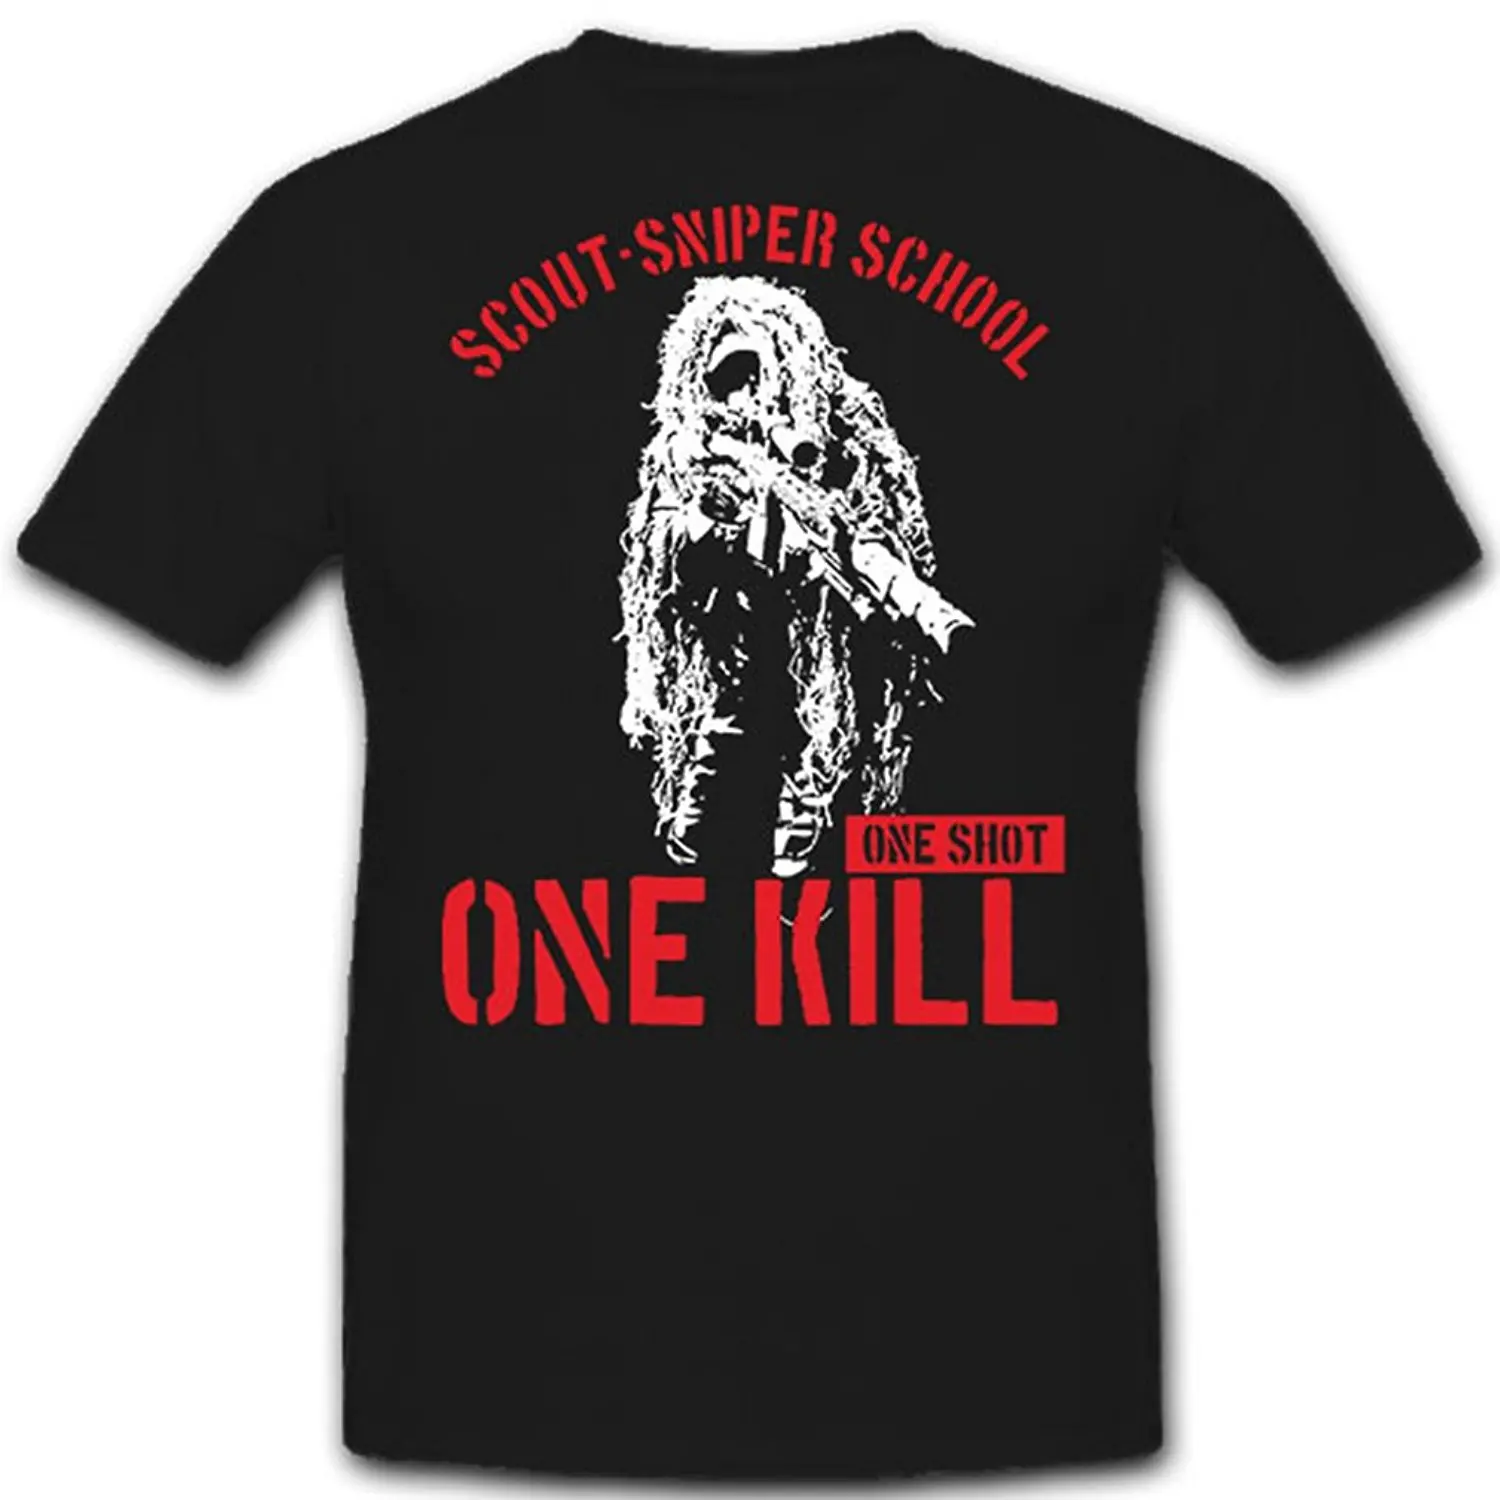 

One Shot One Kill. US Army Scout Sniper School T-Shirt. Summer Cotton Short Sleeve O-Neck Mens T Shirt New S-3XL